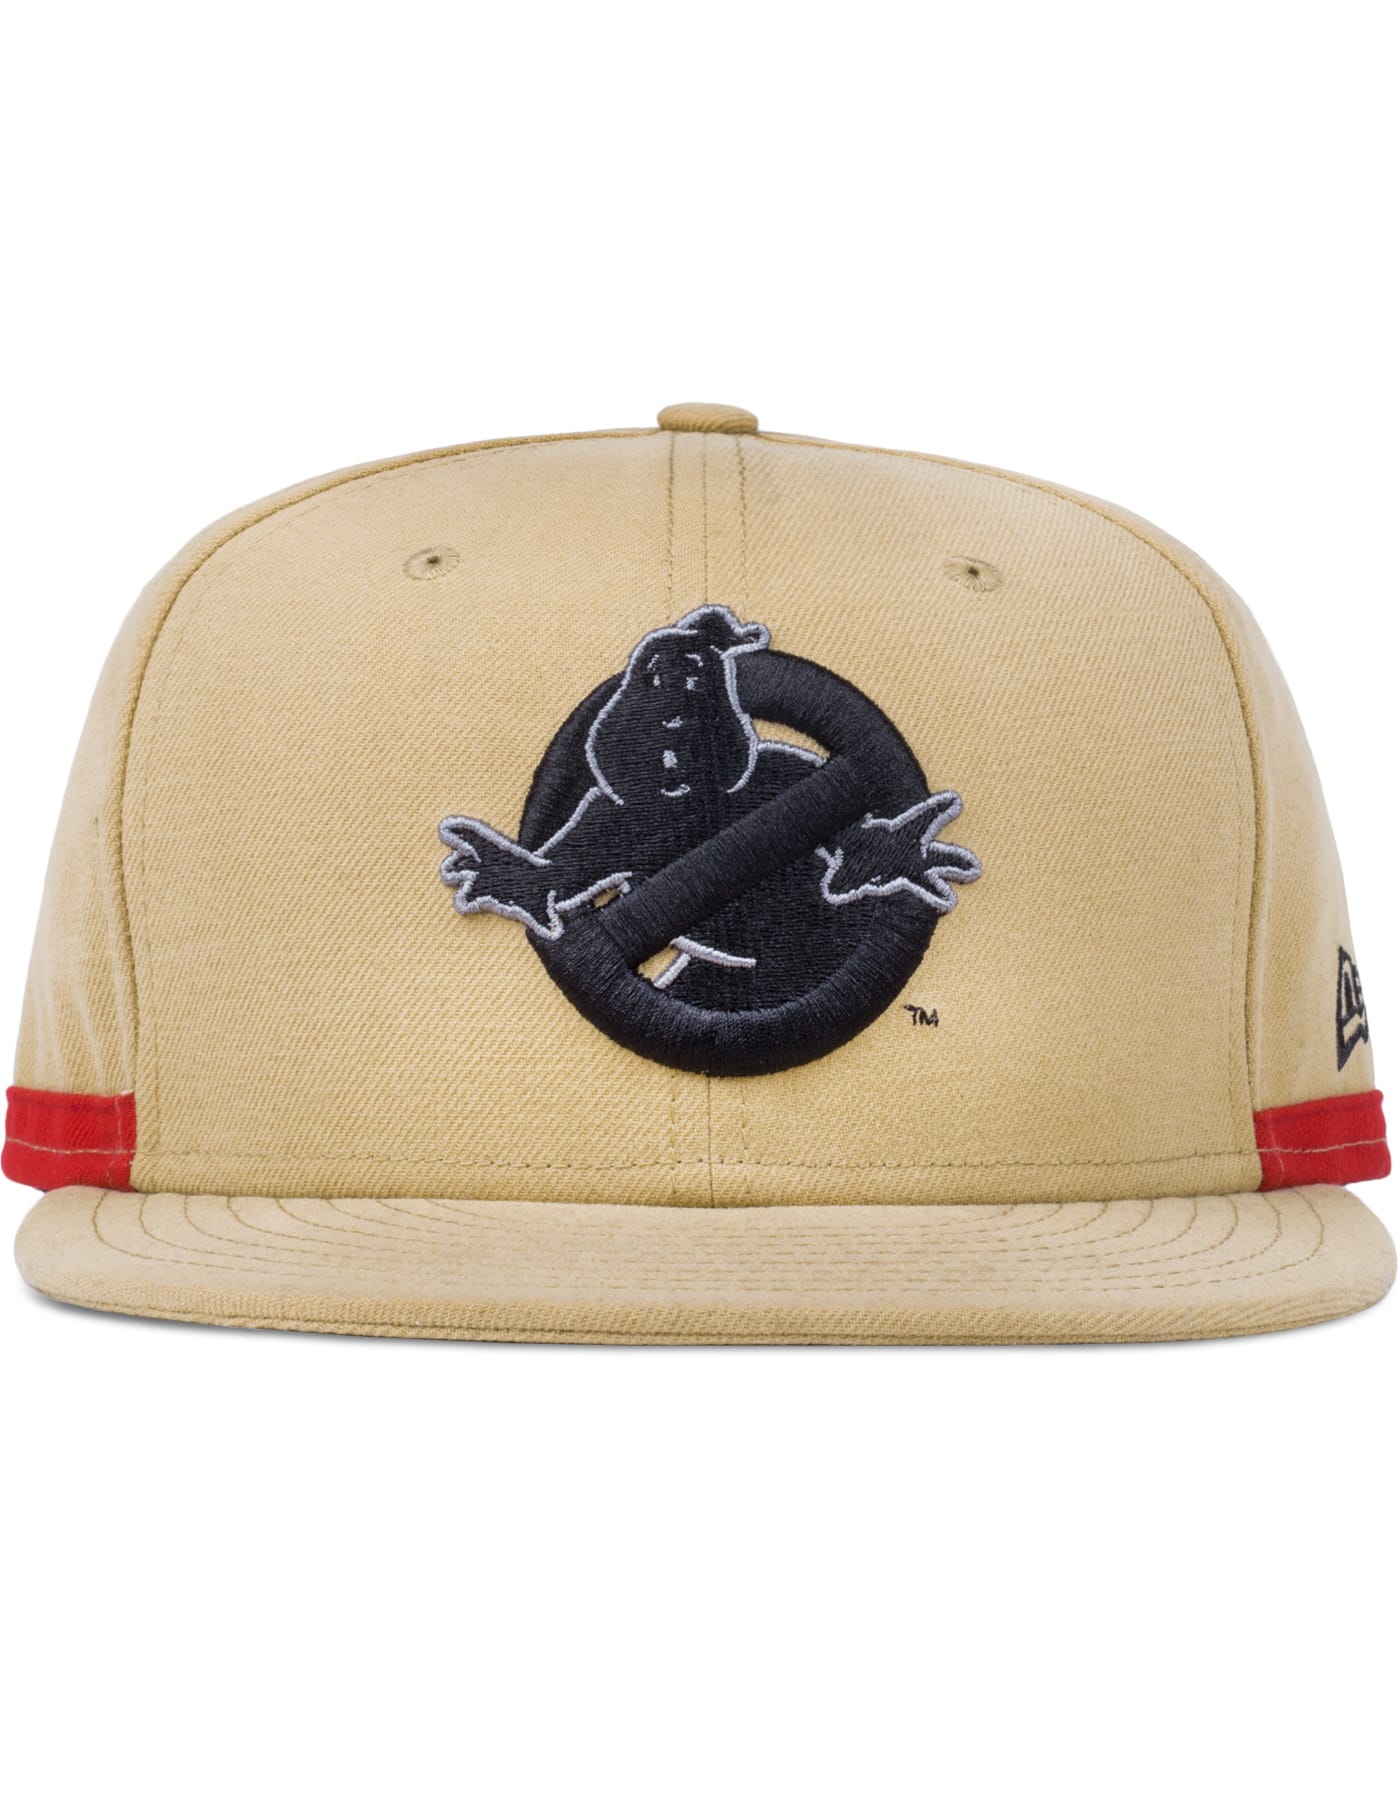 NEW ERA × GHOSTBUSTERS 9FIFTY CAP